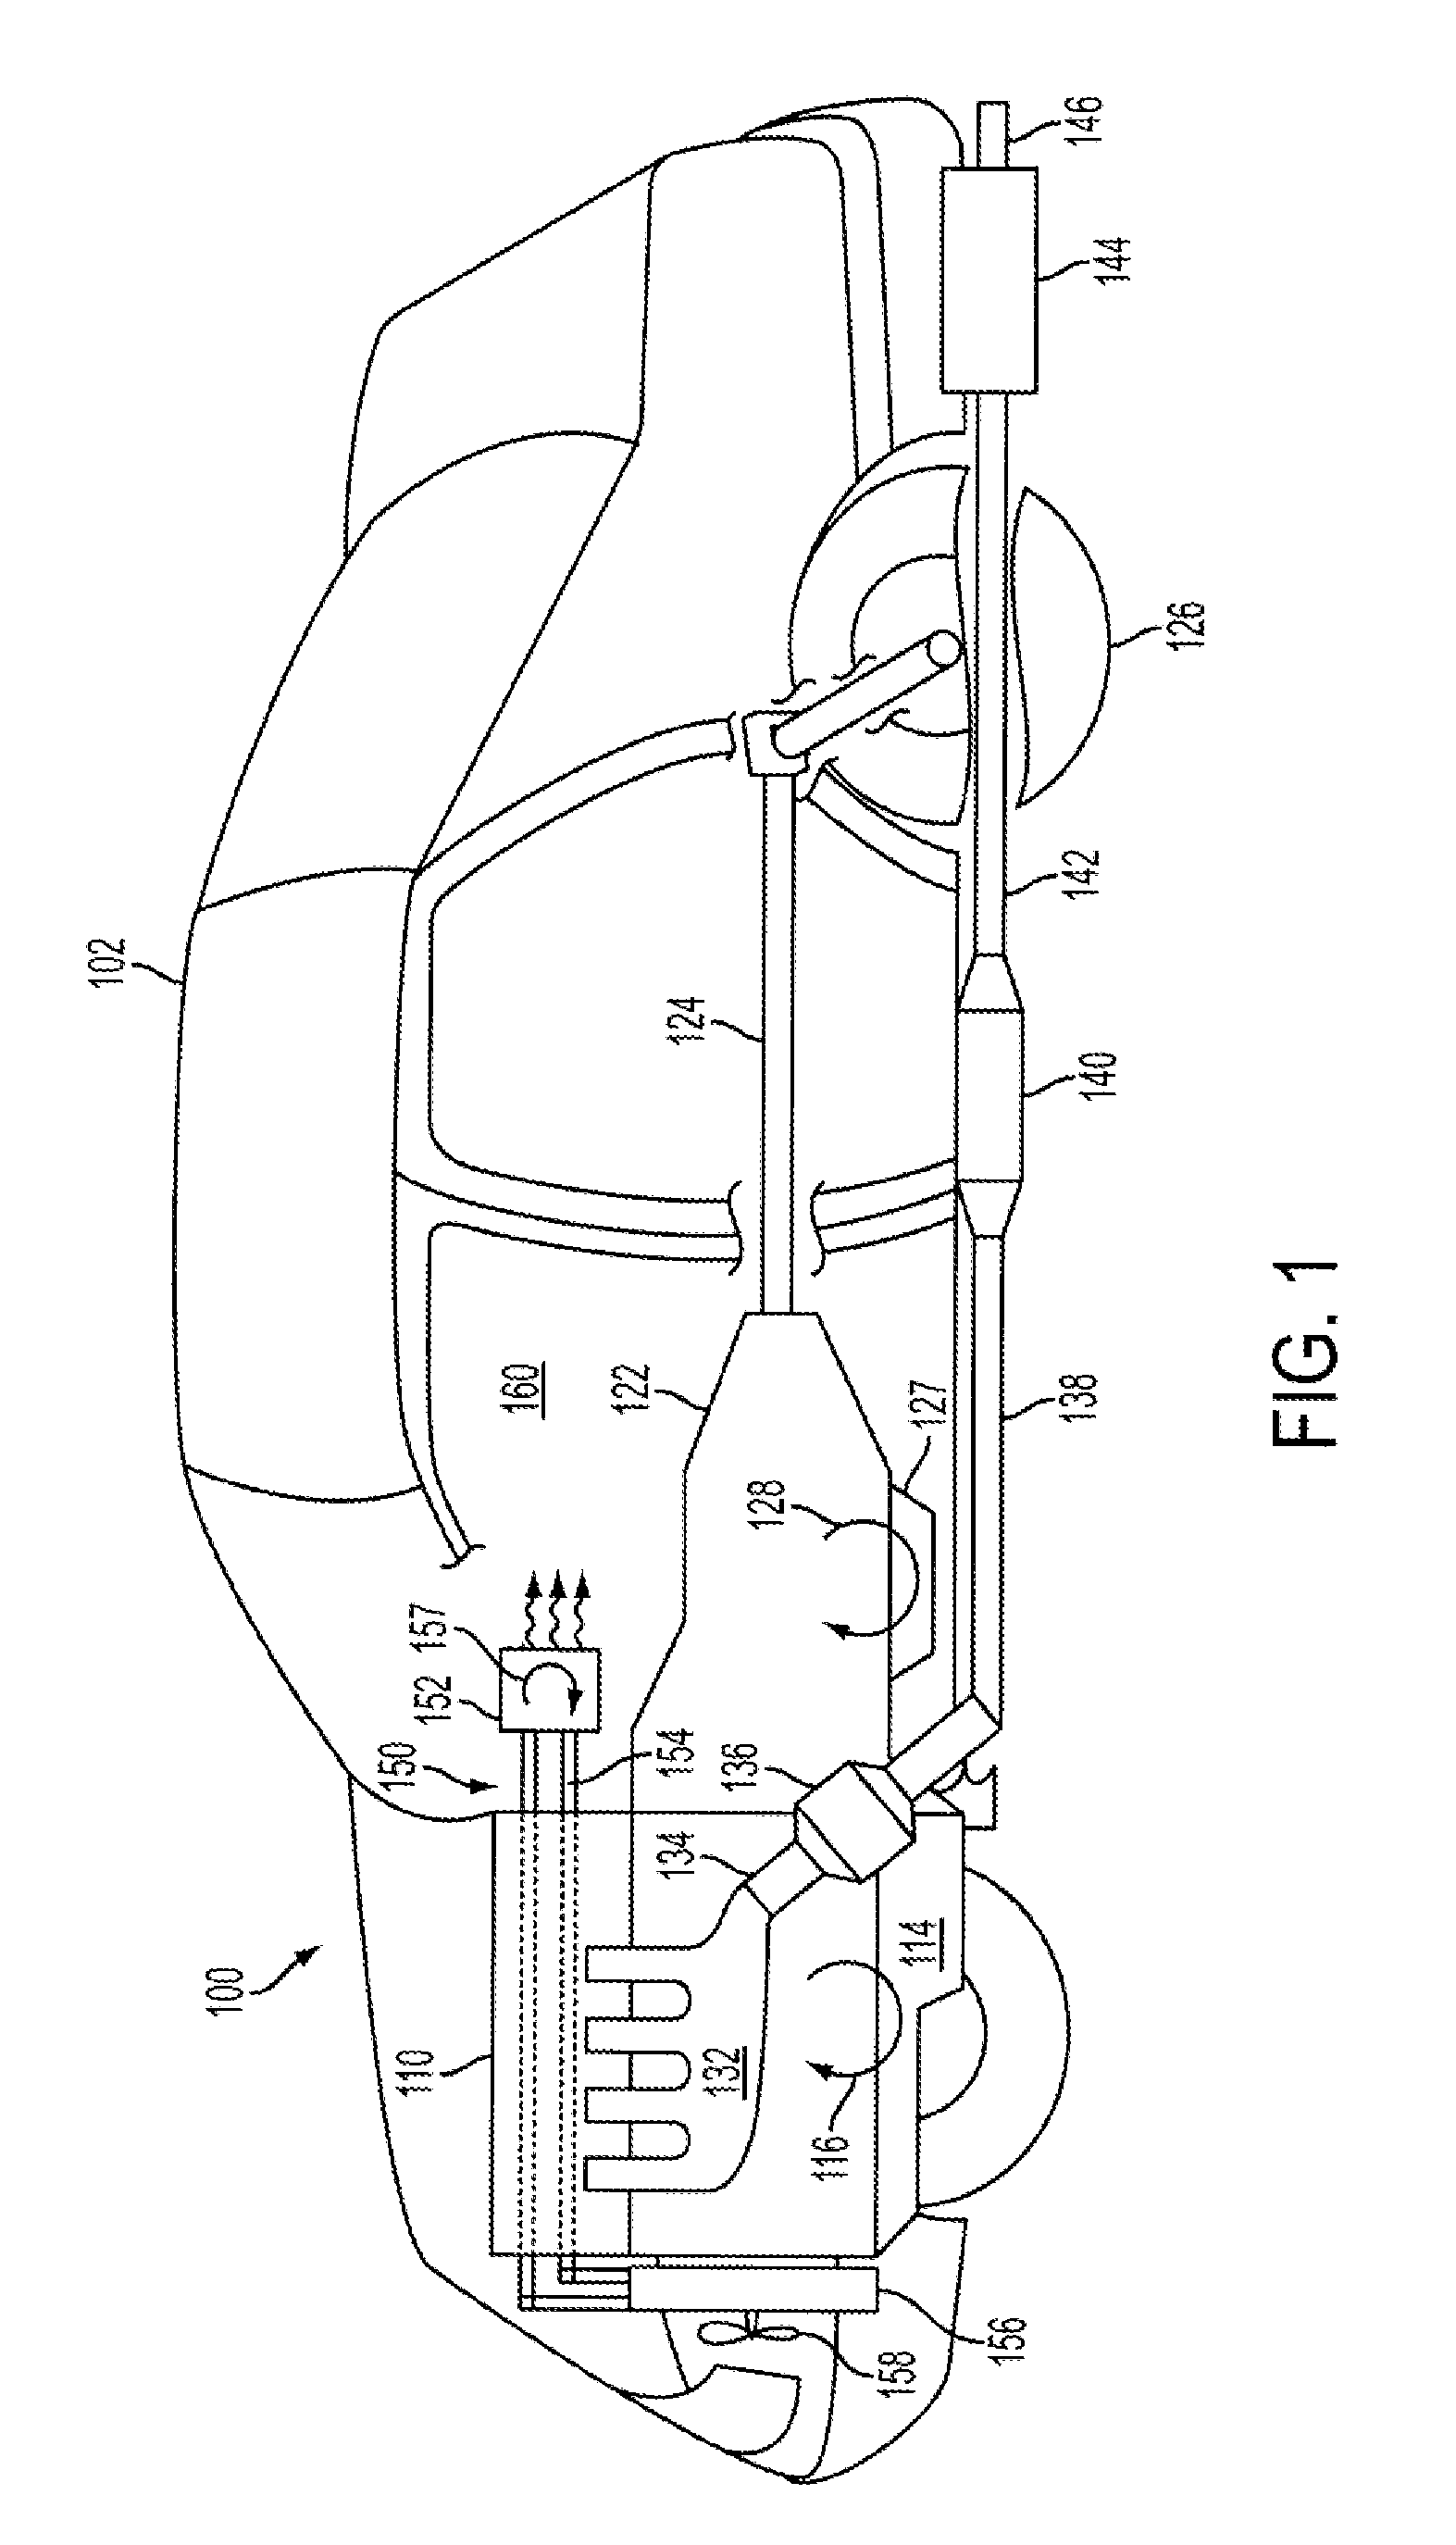 Engine System Including Heat Pipe